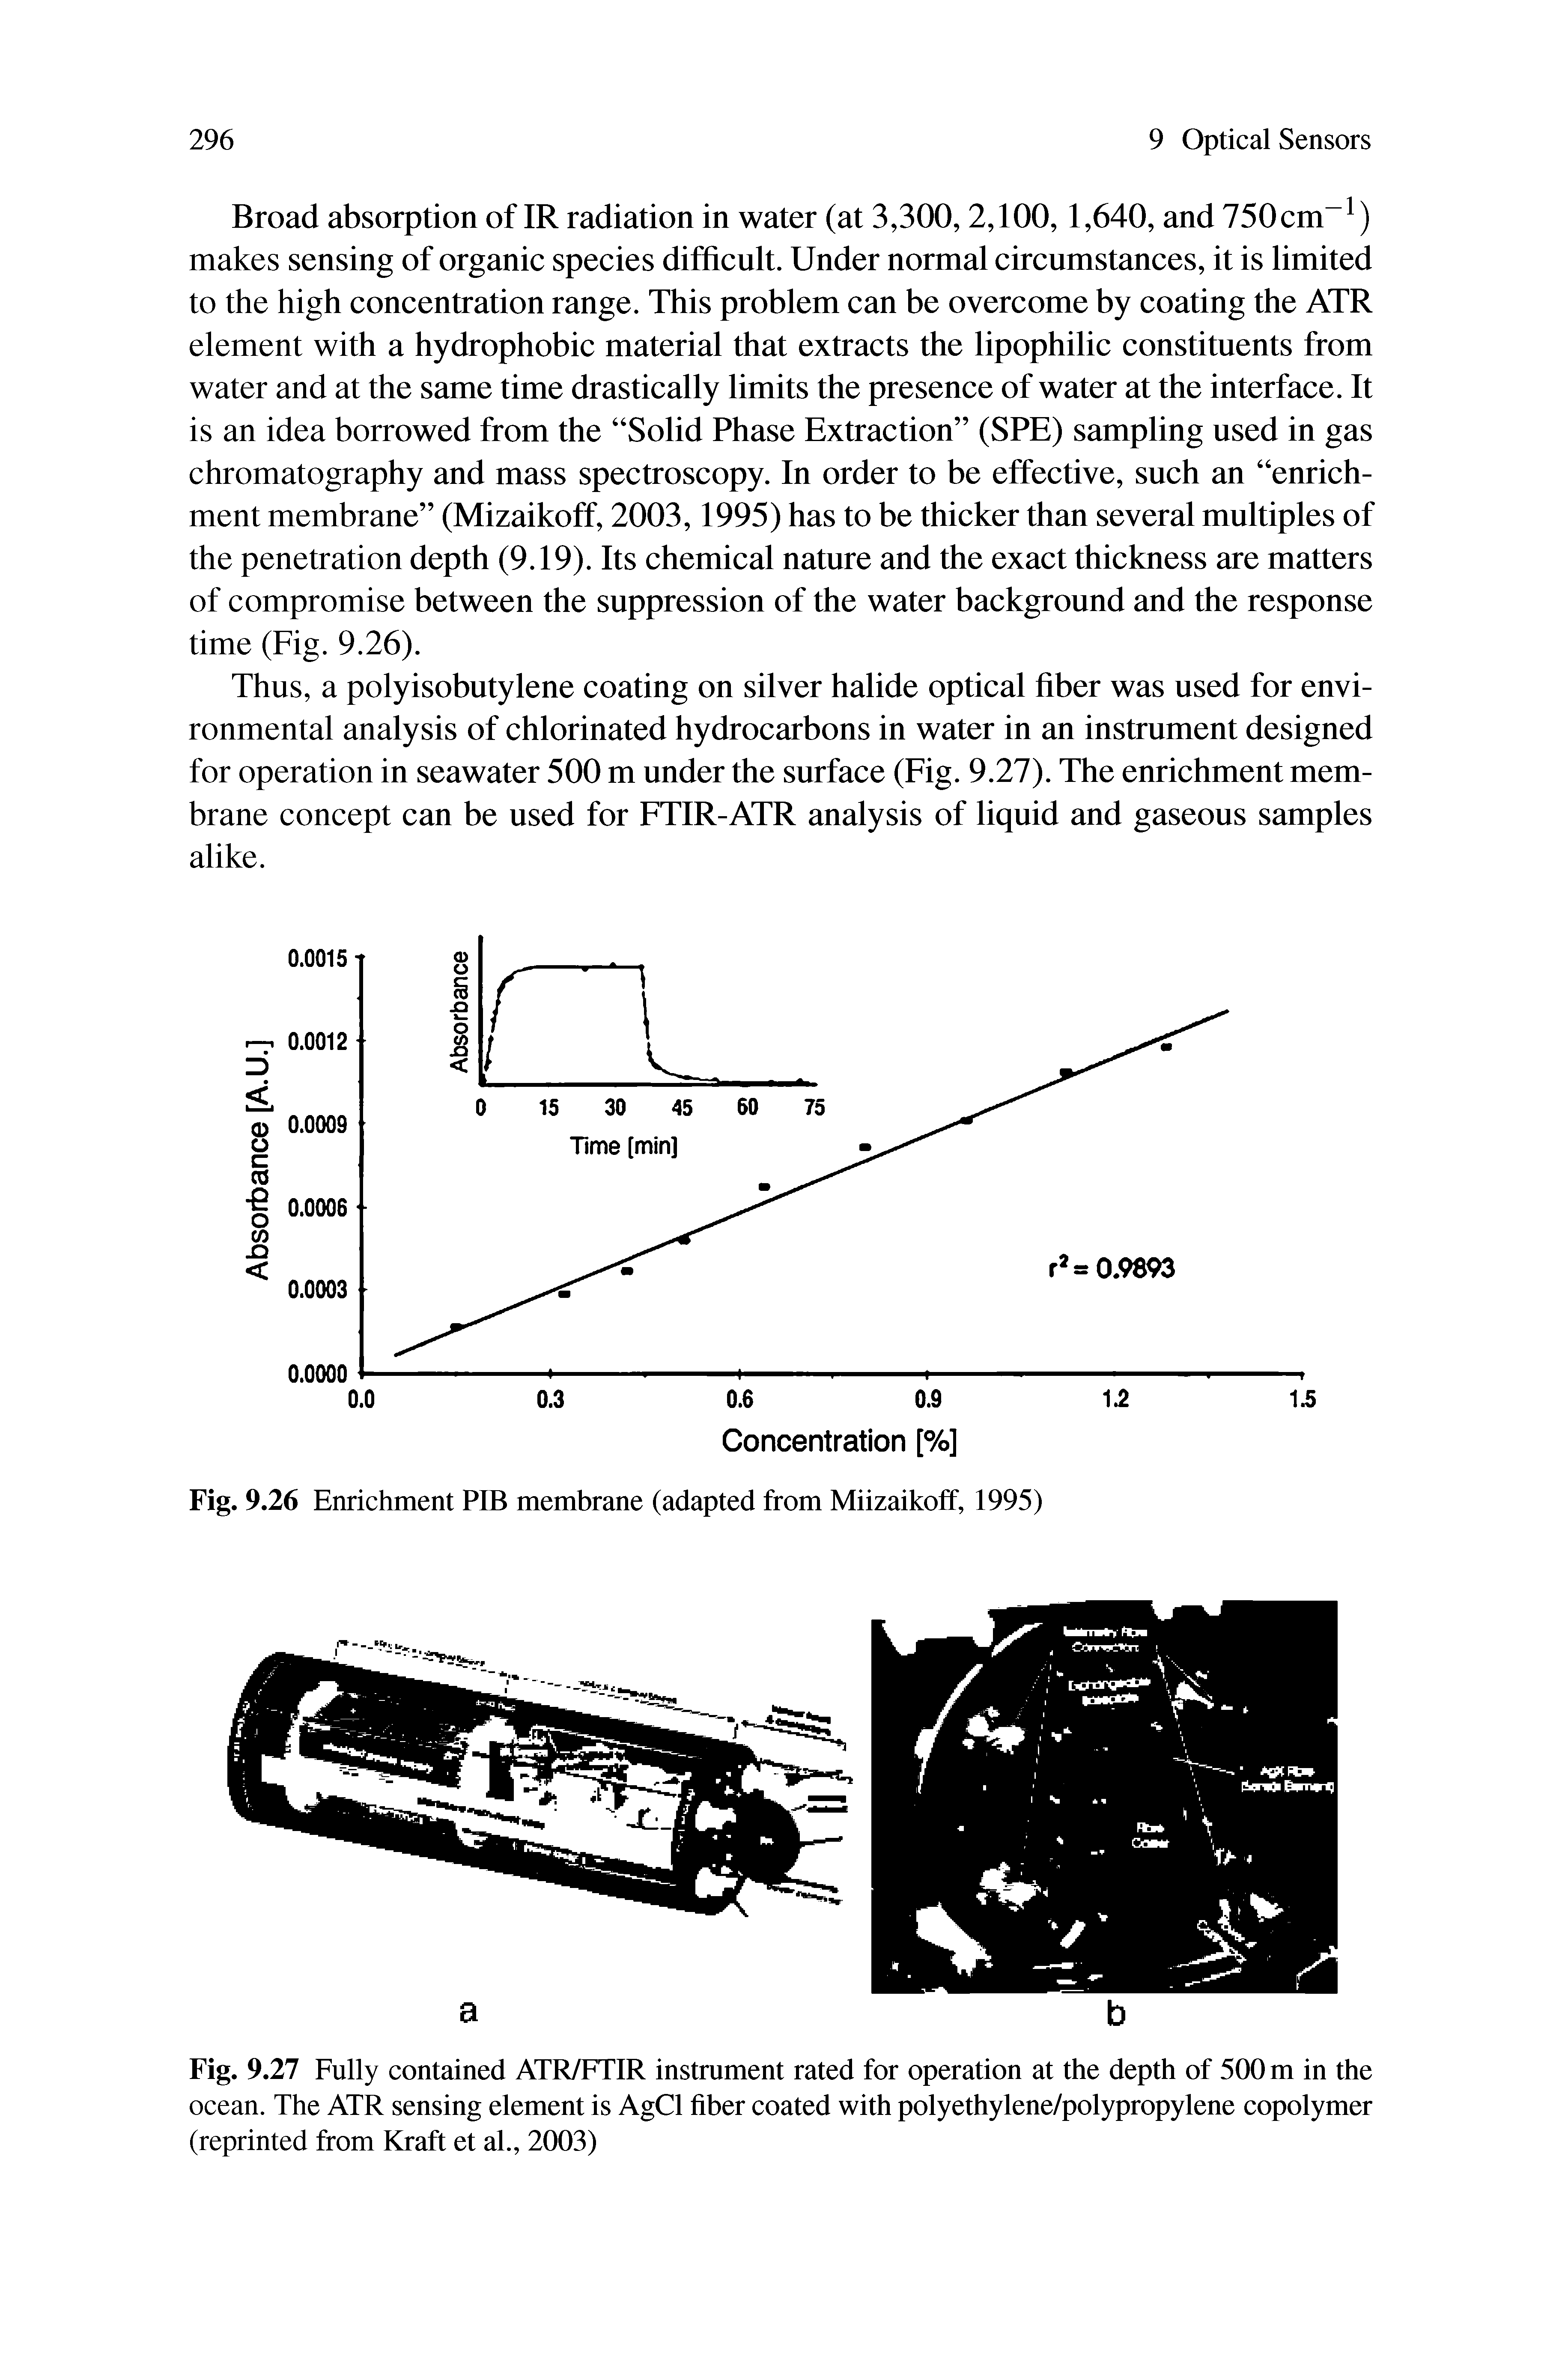 Fig. 9.27 Fully contained ATR/FTIR instrument rated for operation at the depth of 500 m in the ocean. The ATR sensing element is AgCl fiber coated with polyethylene/polypropylene copolymer (reprinted from Kraft et al., 2003)...